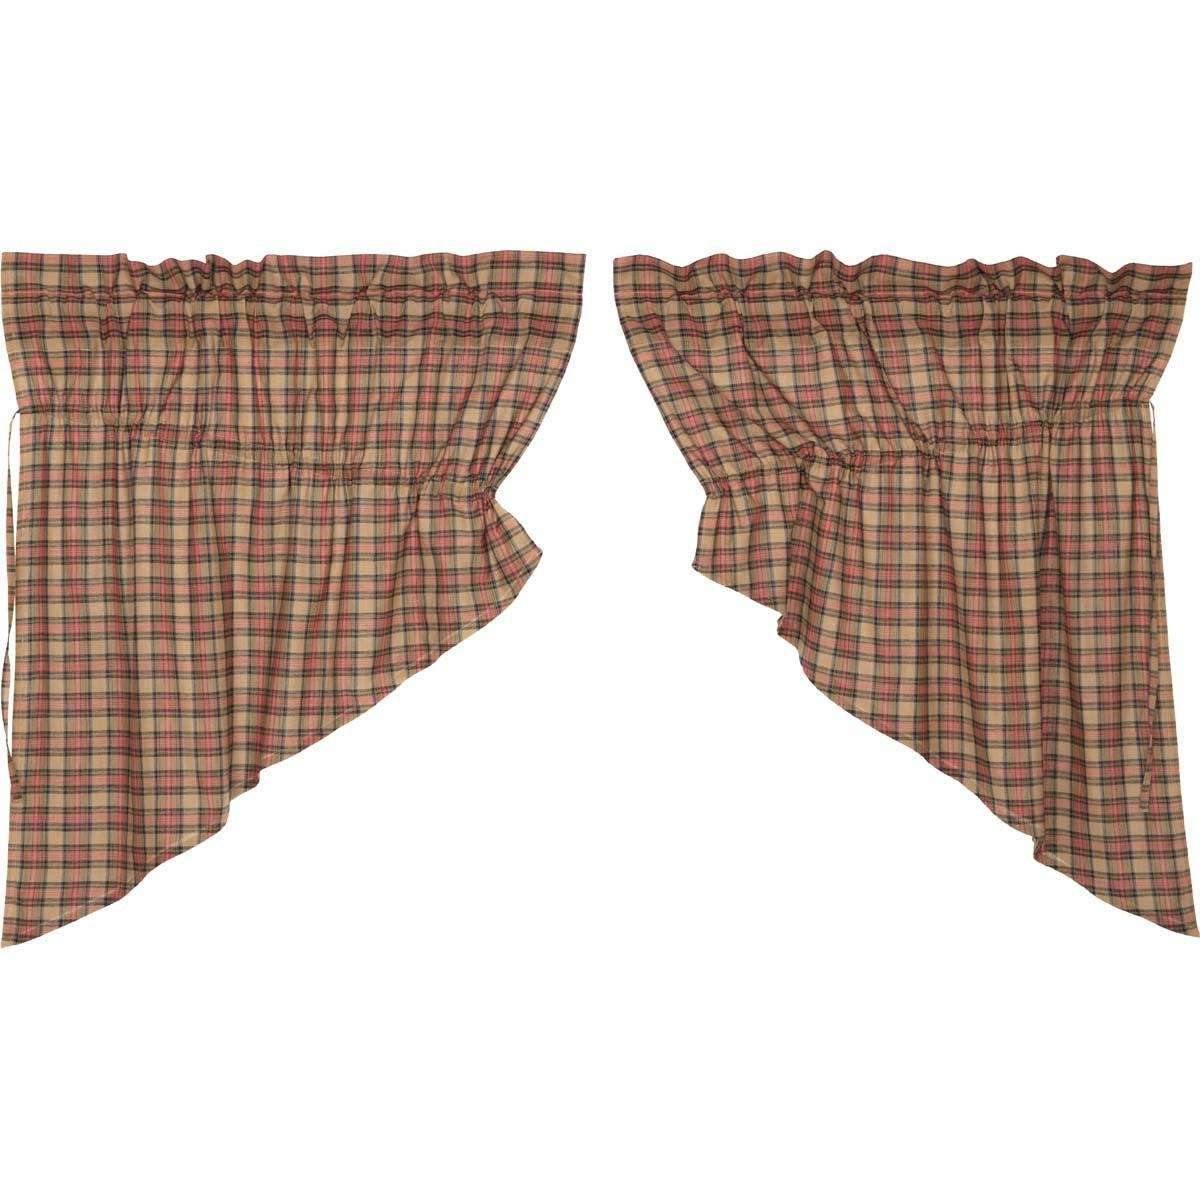 Crosswoods Prairie Swag Curtain Set of 2 36x36x18 VHC Brands online